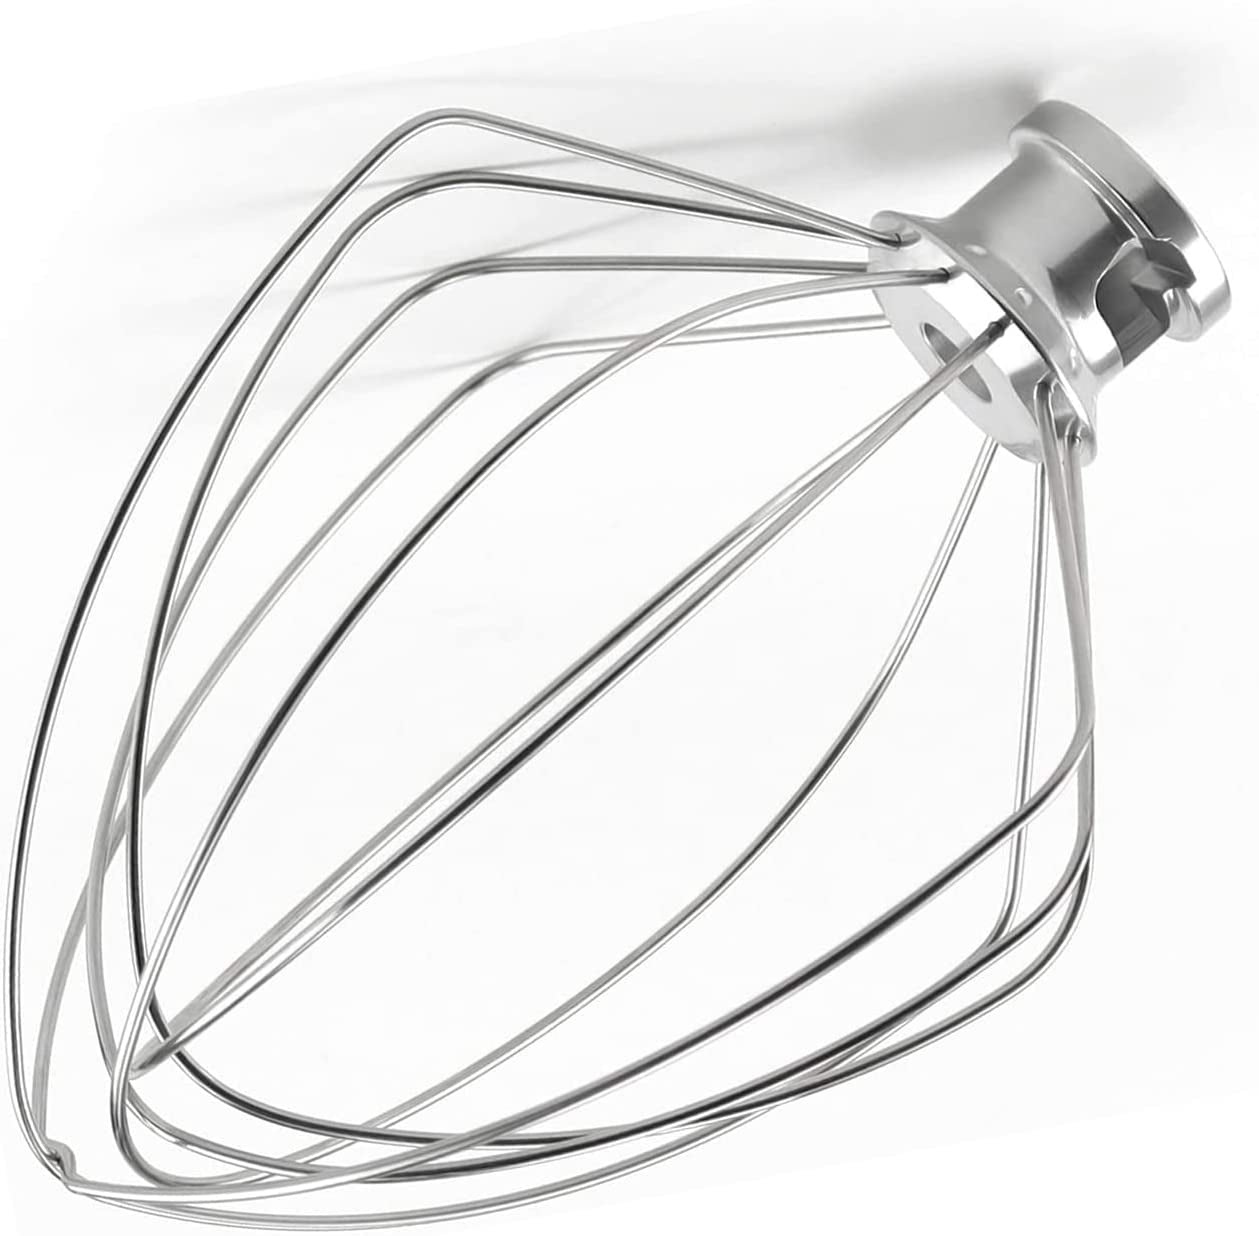  KN256 Stainless Steel Wire Whip for Bowl-Lift Mixer 6 Quart  Bowl, 6 Wire Whisk Fits for Professional 600, KP26M1X,KD2661X,KP2671X,Pro  6500,Heavy Duty, Dishwasher Safe, Balloon Whisk: Home & Kitchen